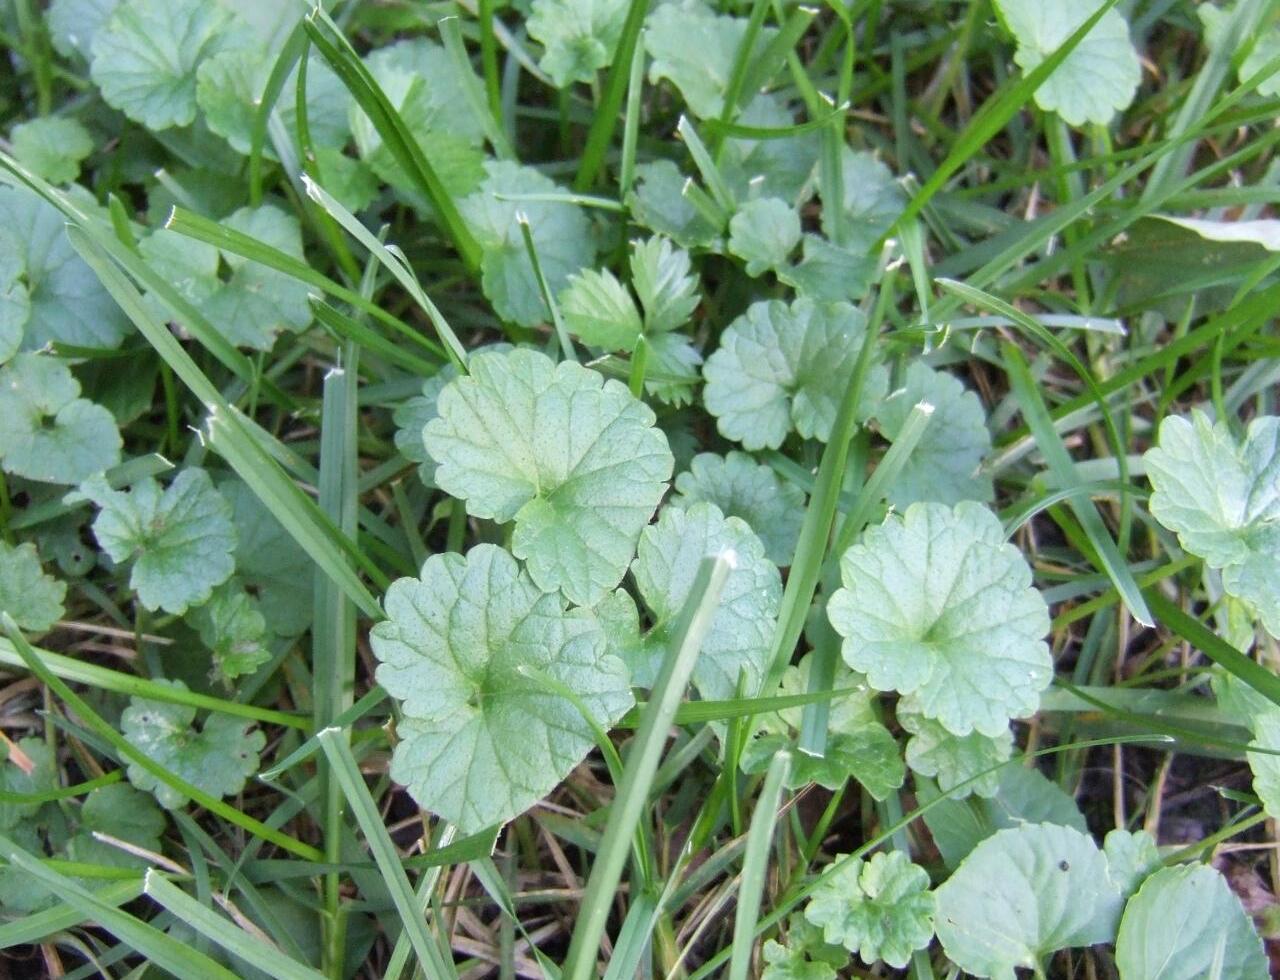 How To Get Rid Of Ground Ivy Without Killing Grass